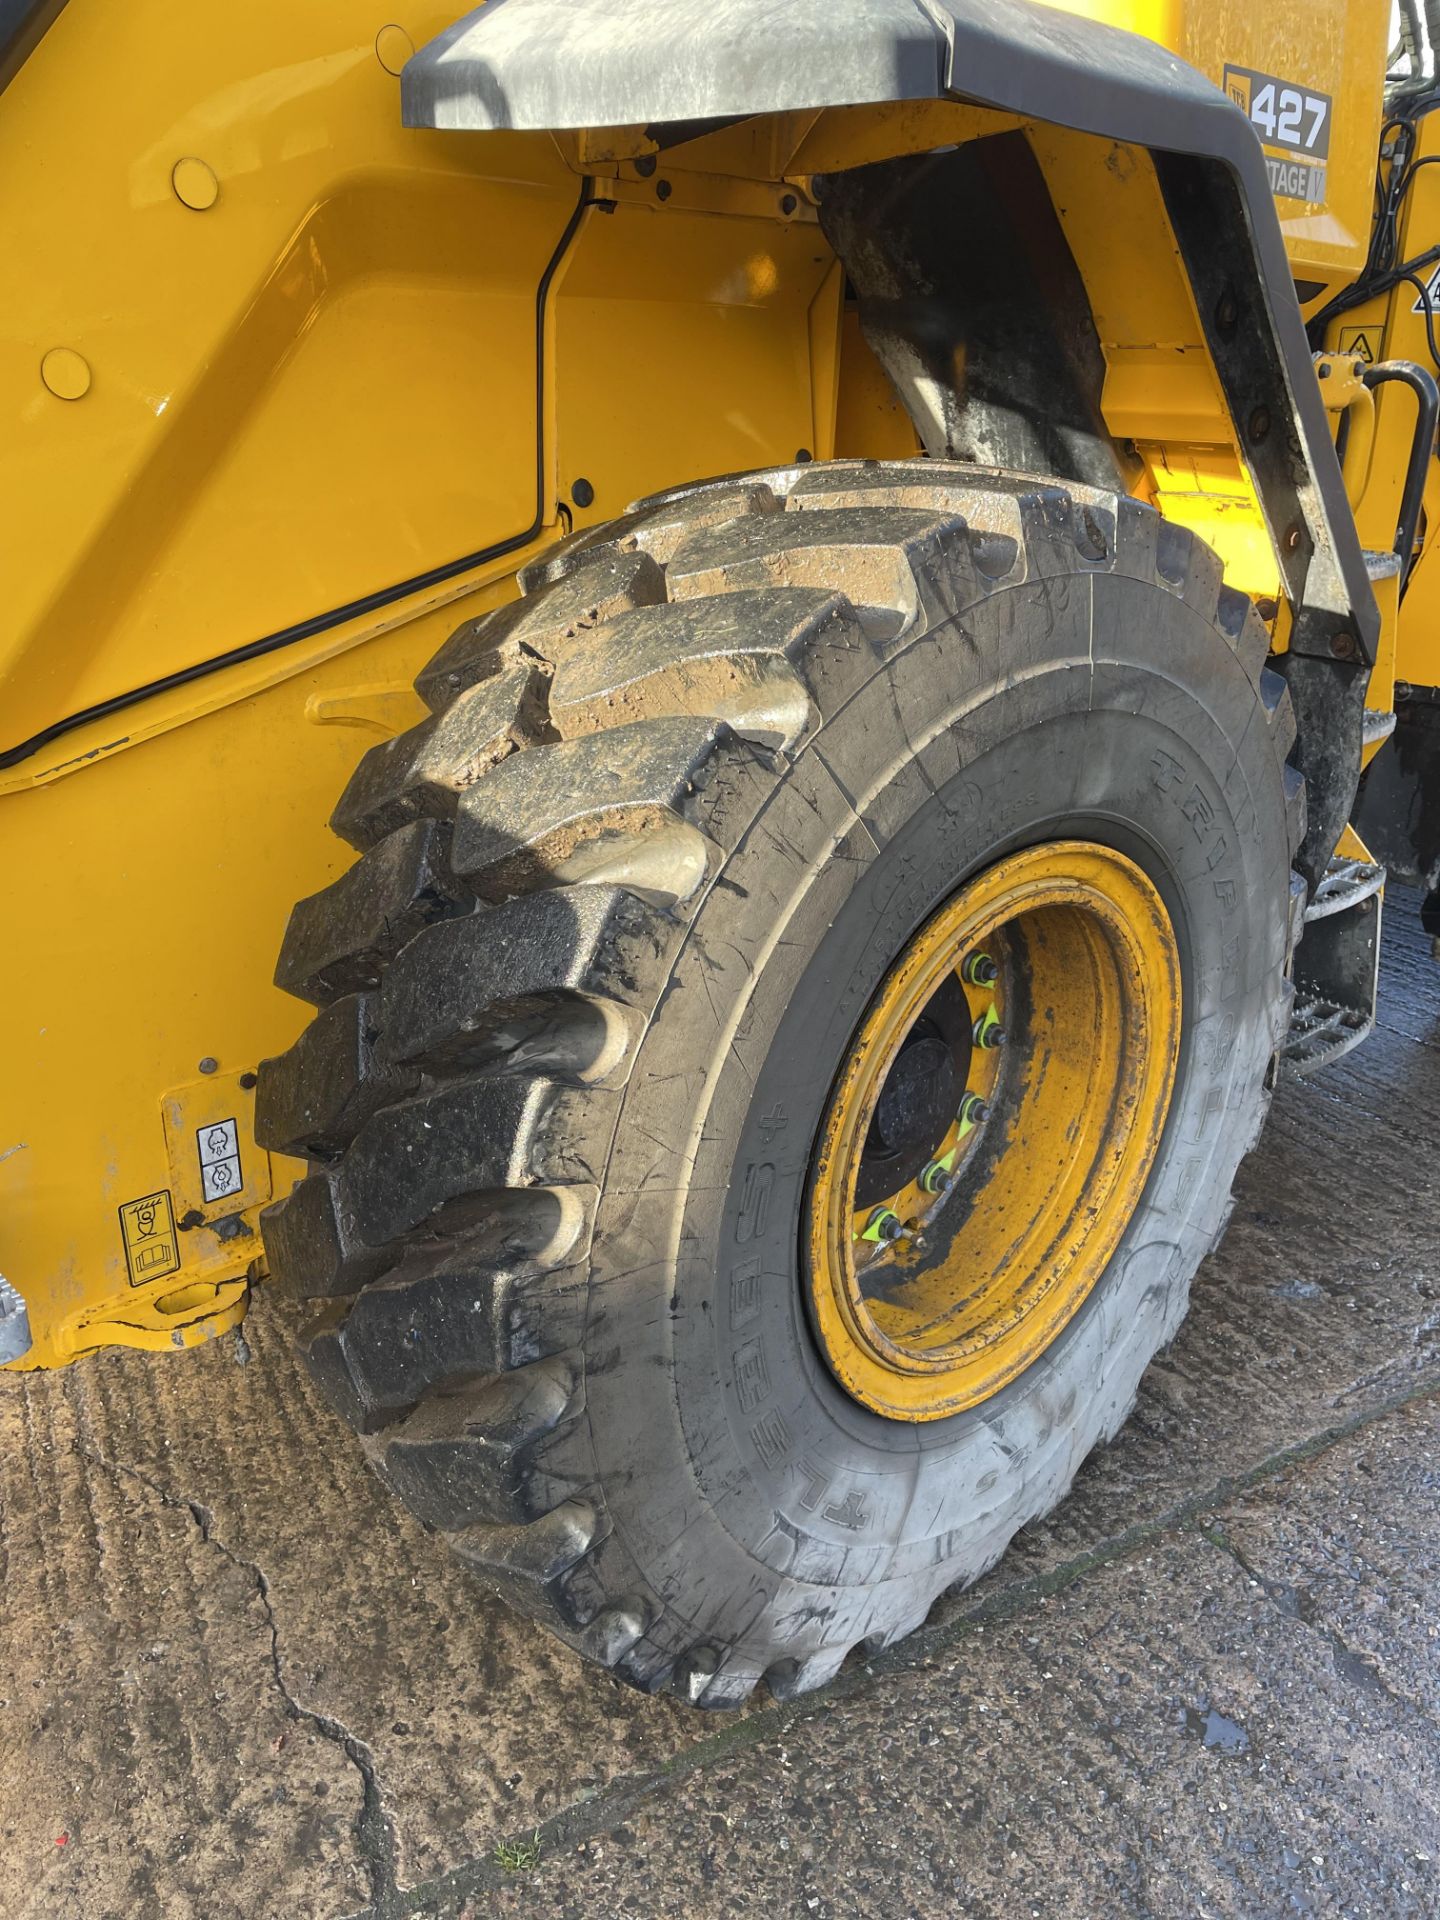 JCB, Wastemaster 427 S5, wheel loader, PIN: JCB4A5A9VK2679908 (2019), Last known Hours 3775.8, - Image 7 of 24